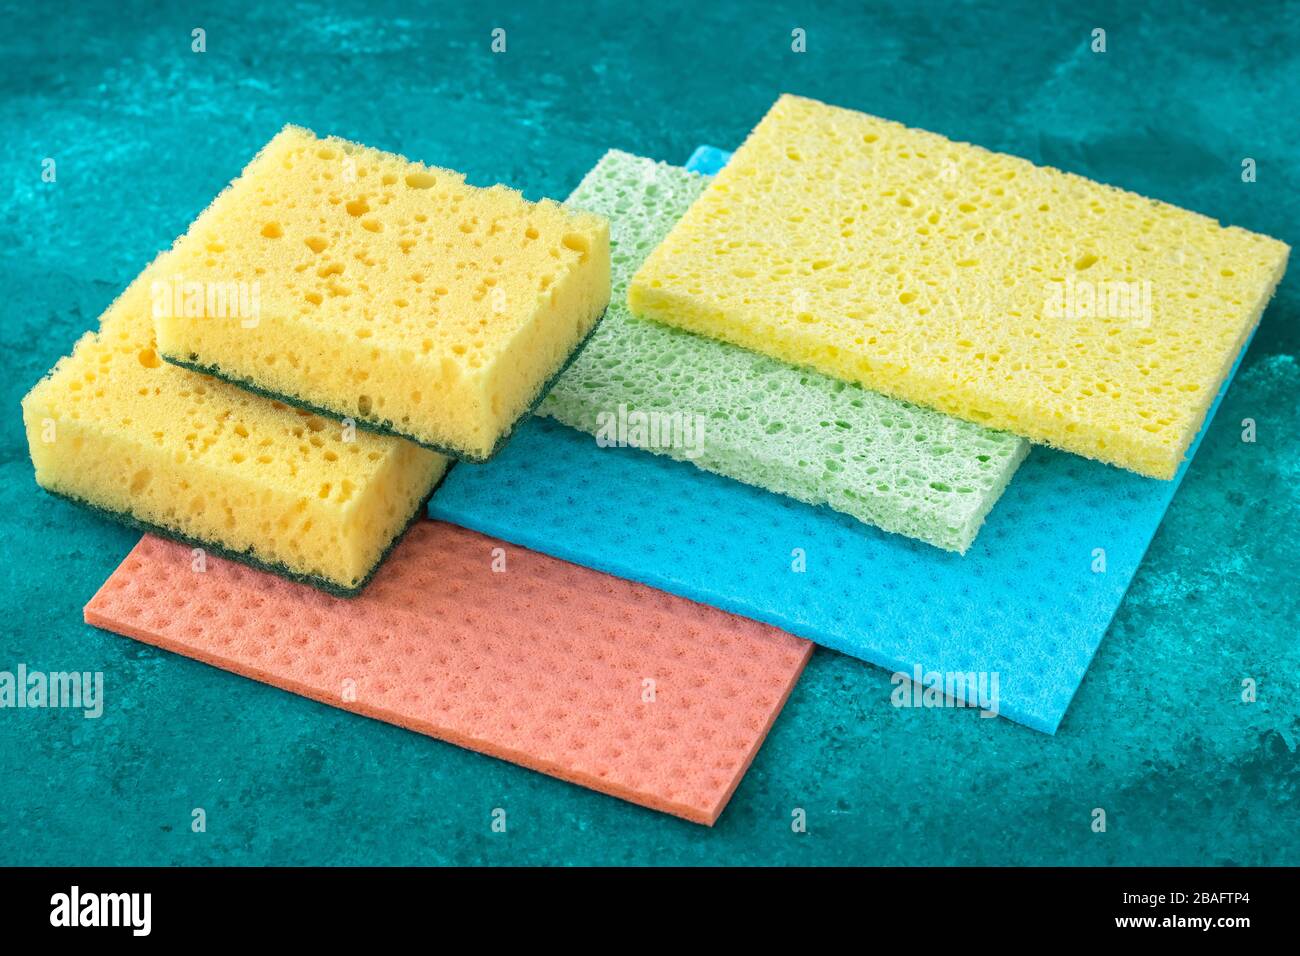 Kitchen dishcloth, cleanup concept, housework. Colorful kitchen sponges for cleaning close-up, housekeeping Stock Photo